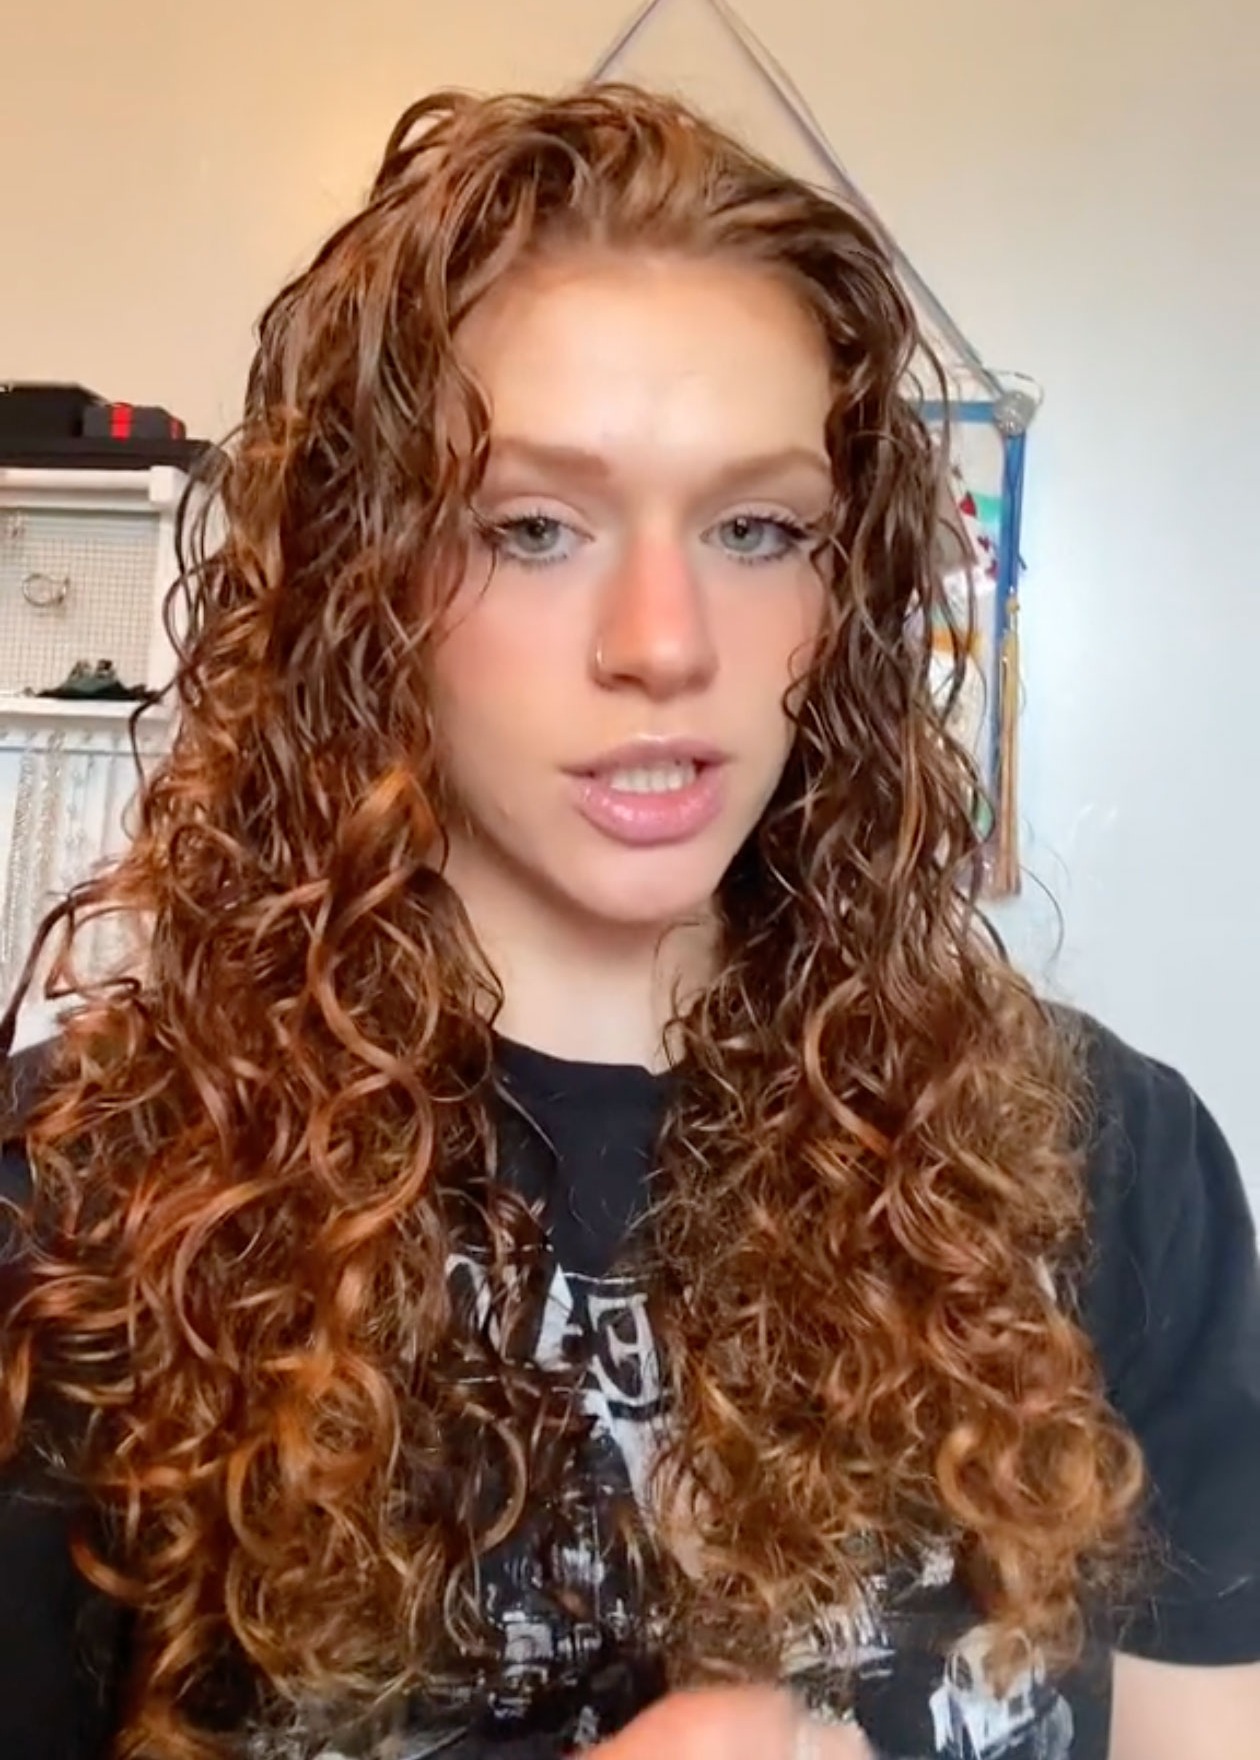 My ‘plop’ hack sculpts my curls overnight – all you need are a T-shirt and a hair tie, your locks will look fabulous